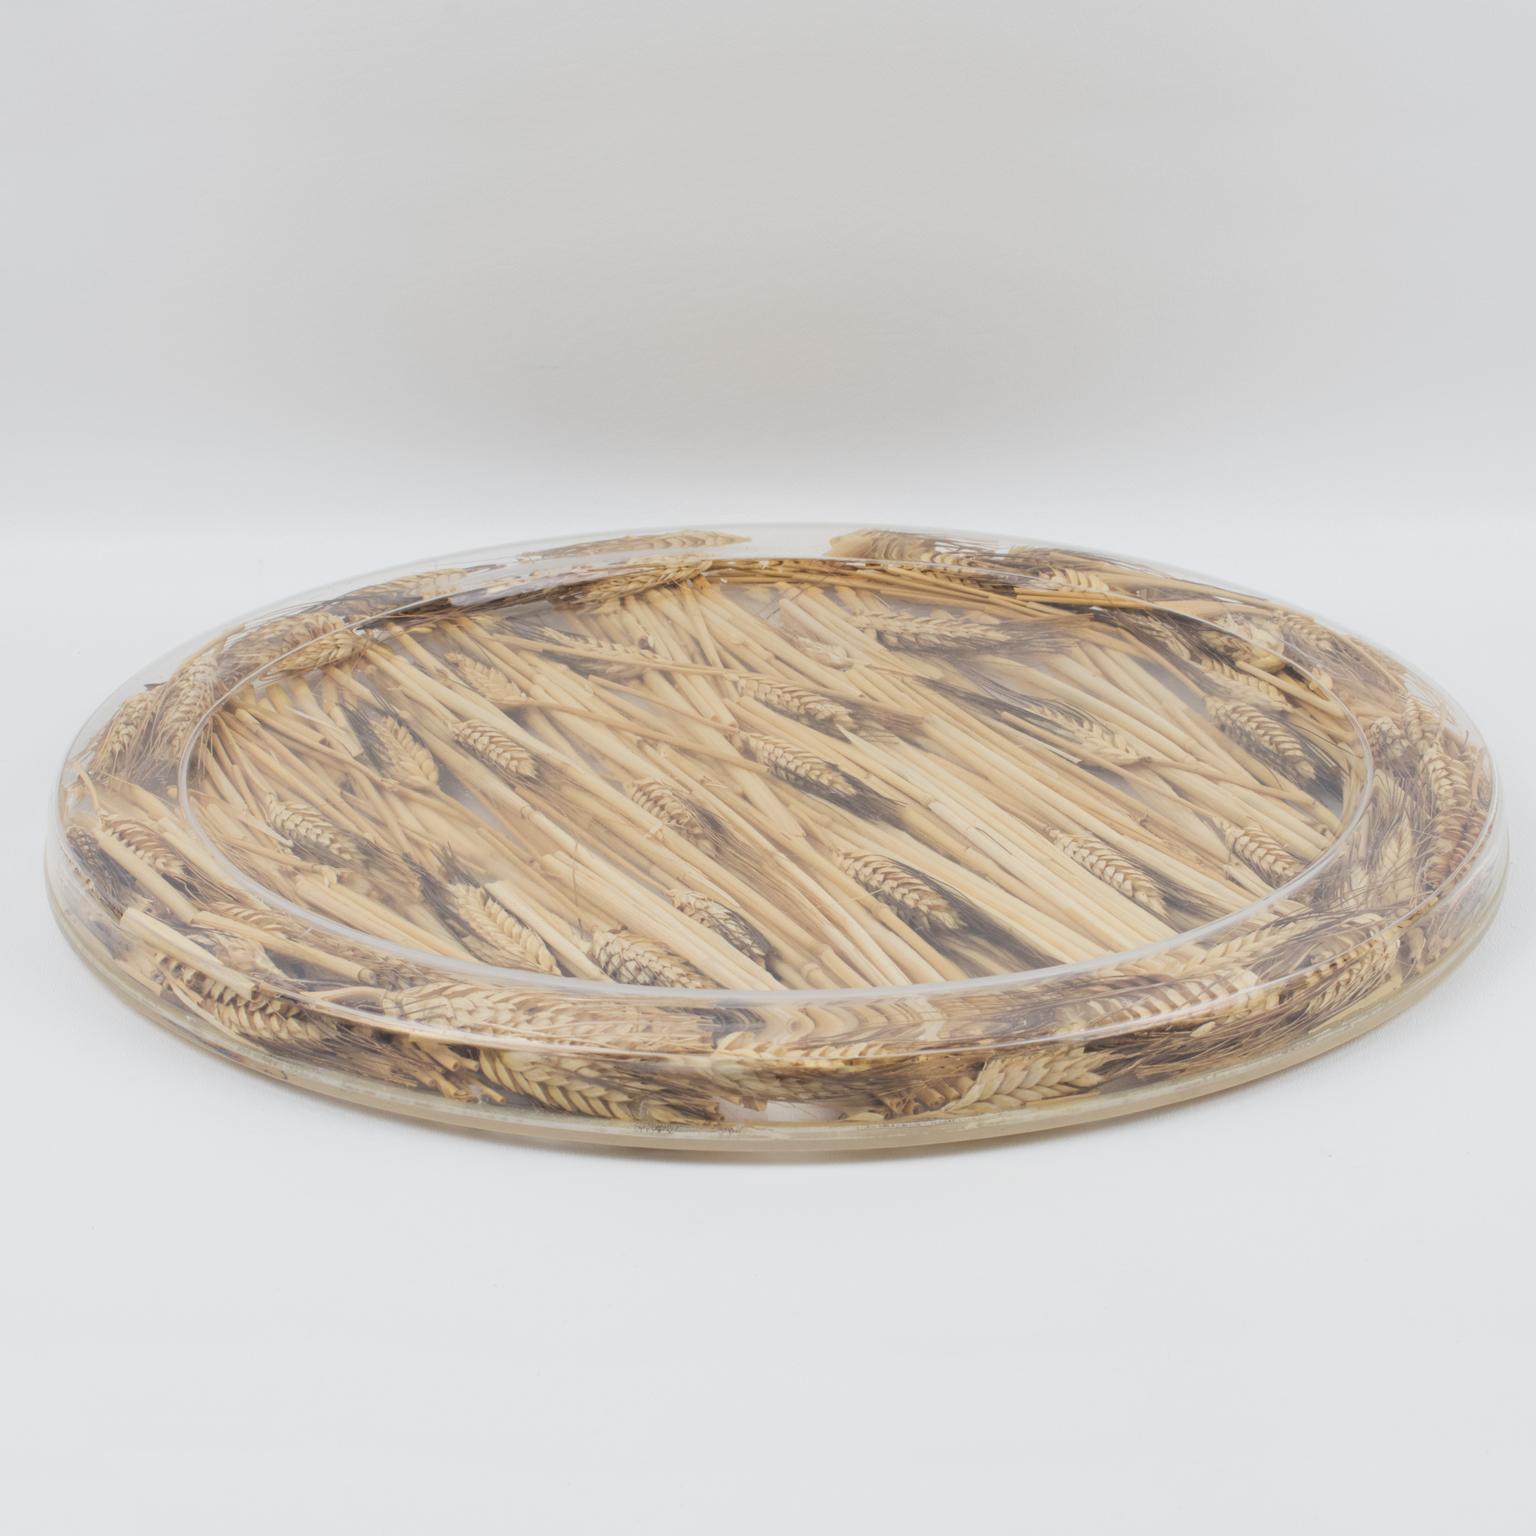 This is a very special and unique serving tray, designed by Christian Dior in the 1970s for his Home Collection. This board or platter has a rounded shape and raised edges. With a natural organic touch, it is made of clear Lucite or plexiglass with